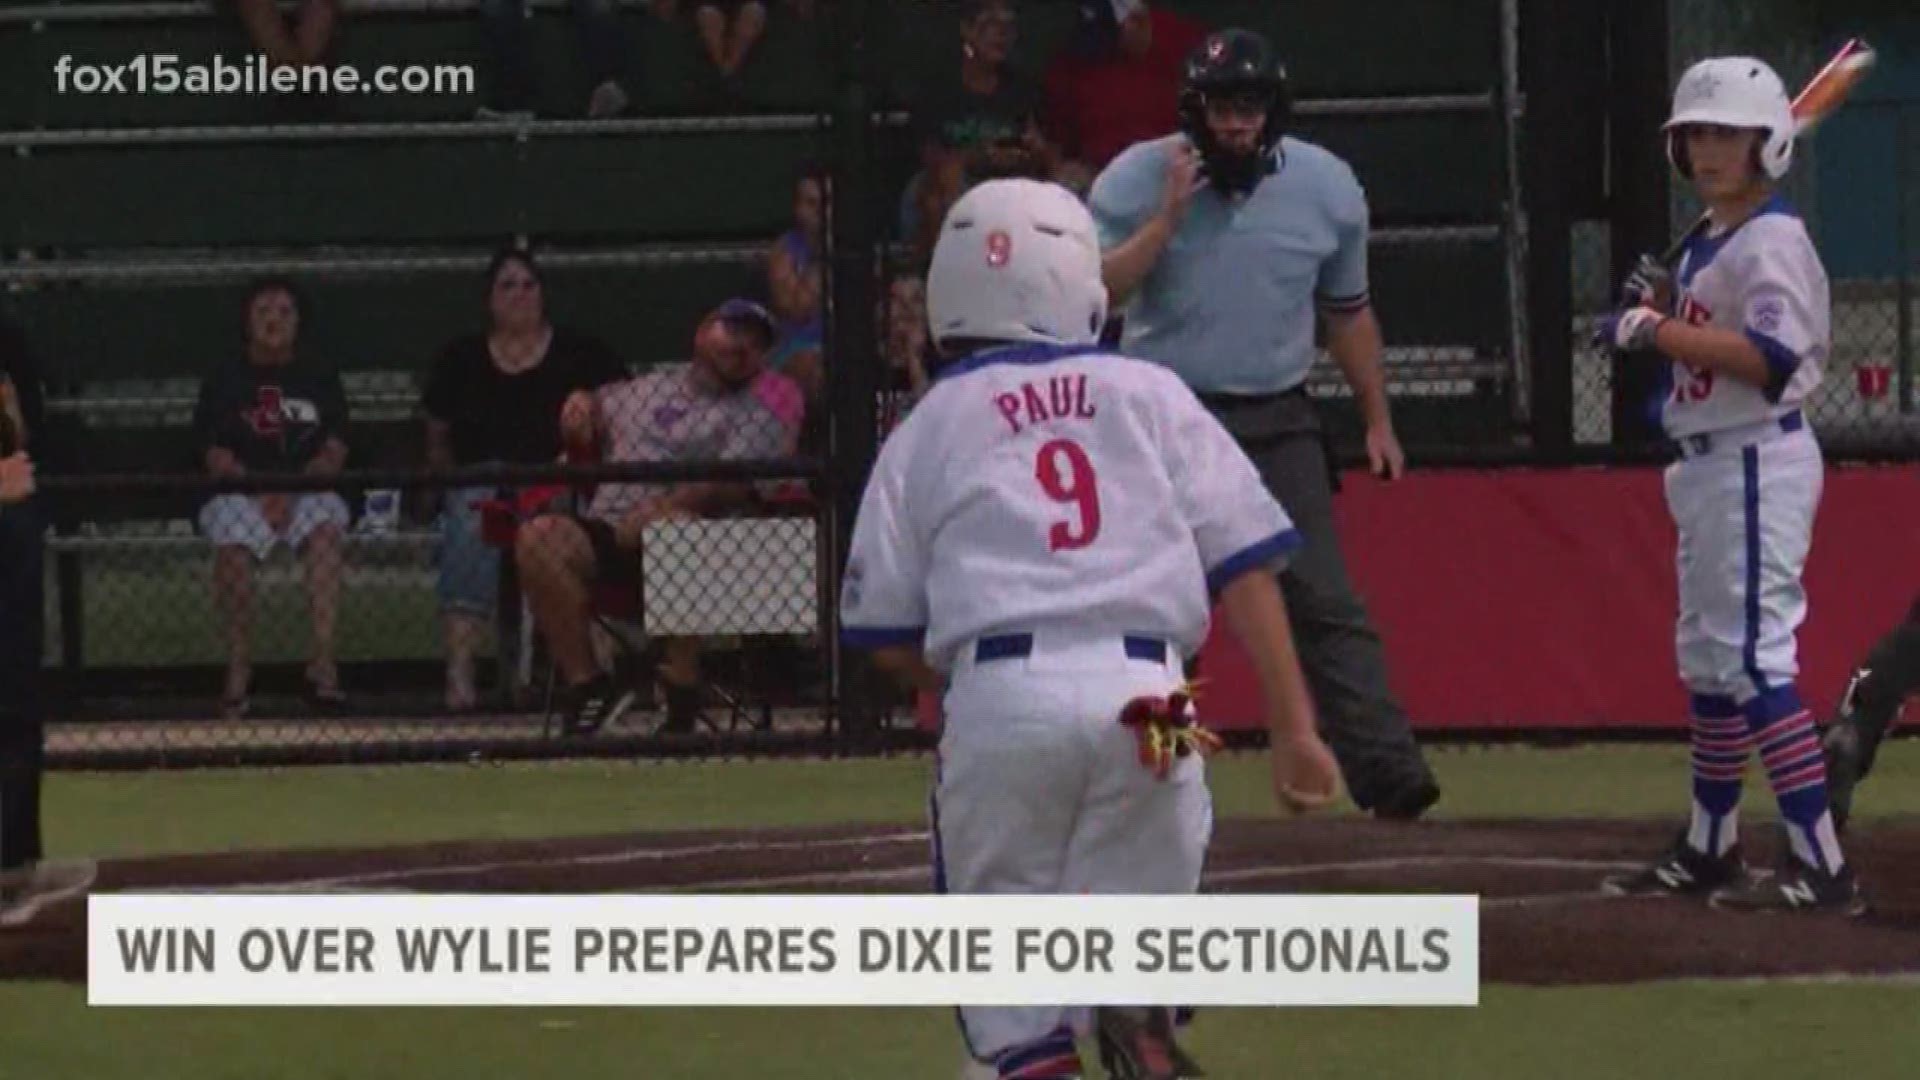 A win over crosstown rival Wylie helped send the Abilene Dixie Little League team to sectionals. Matching up against the Bulldogs provided a perfect opportunity to see what kind of teams the squad will face in sectionals.